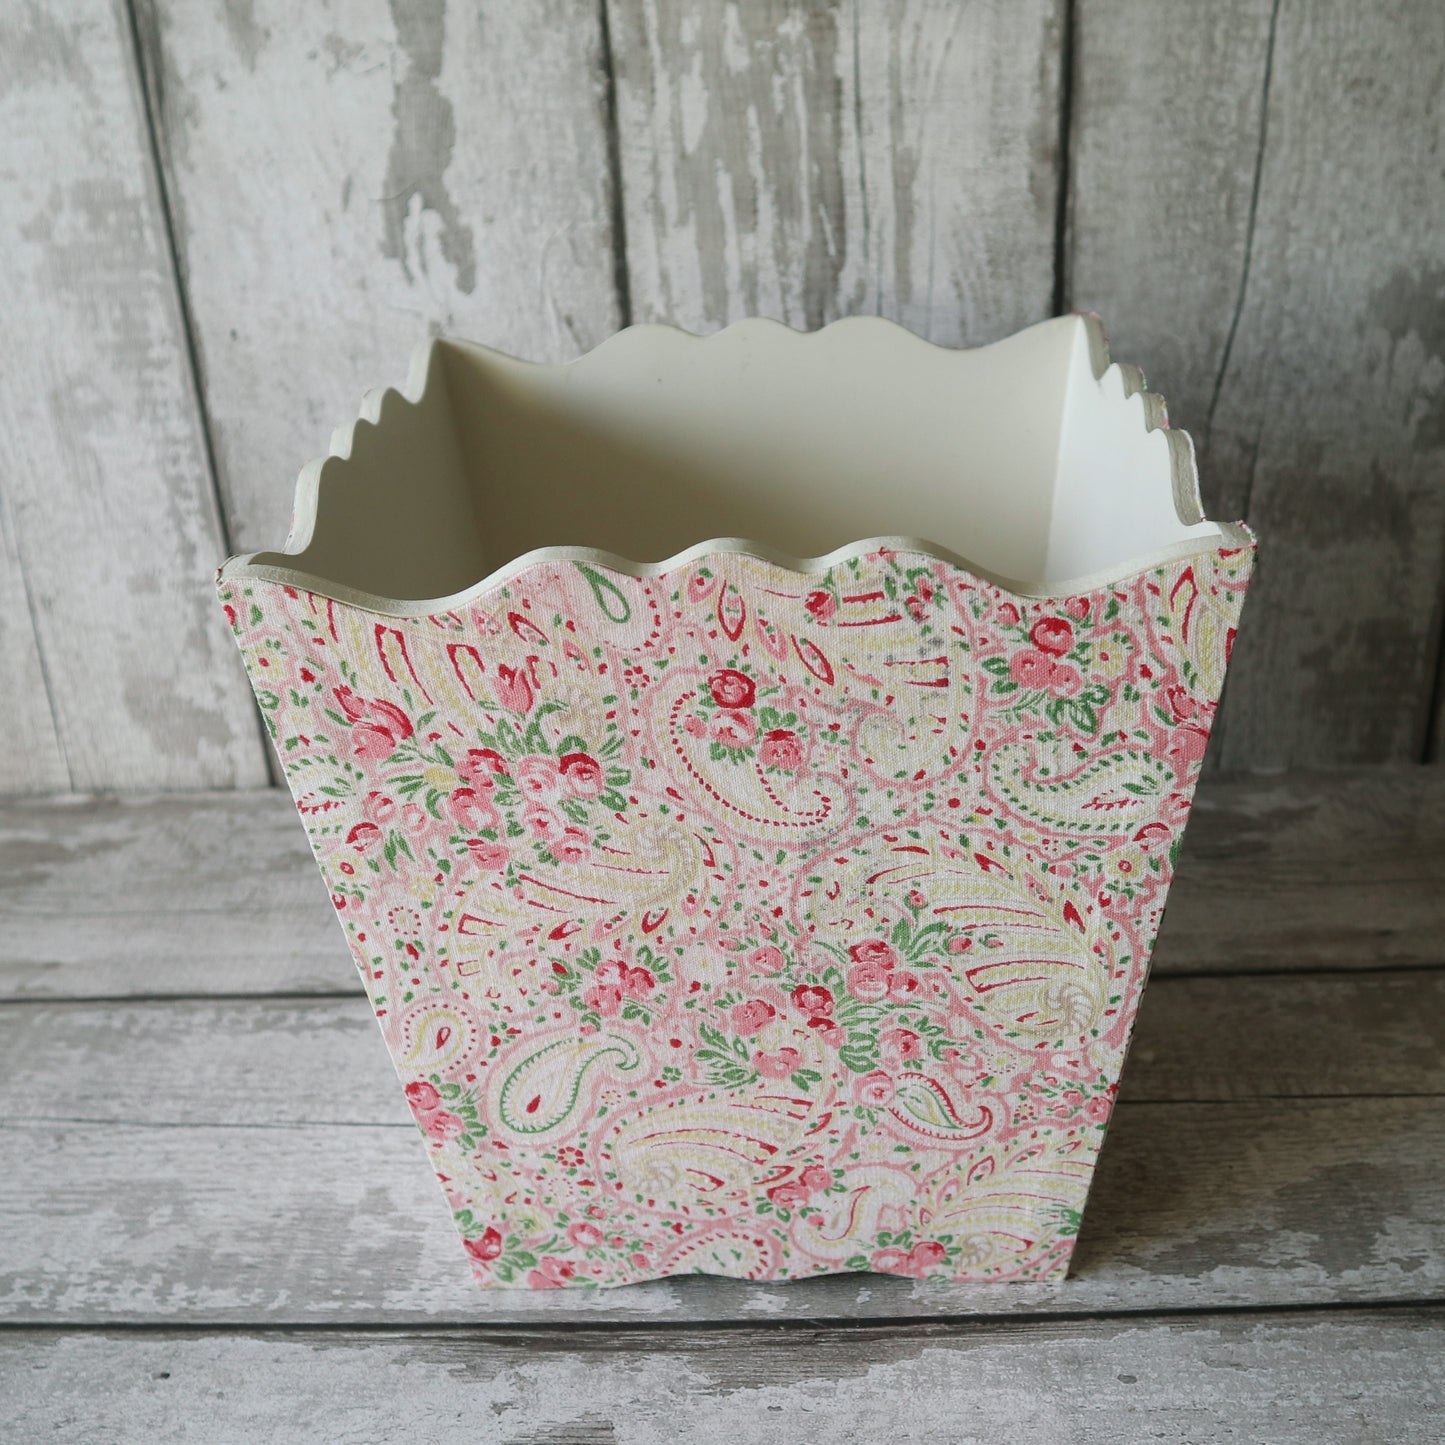 Wooden Fabric Covered Waste Paper Bin / Basket